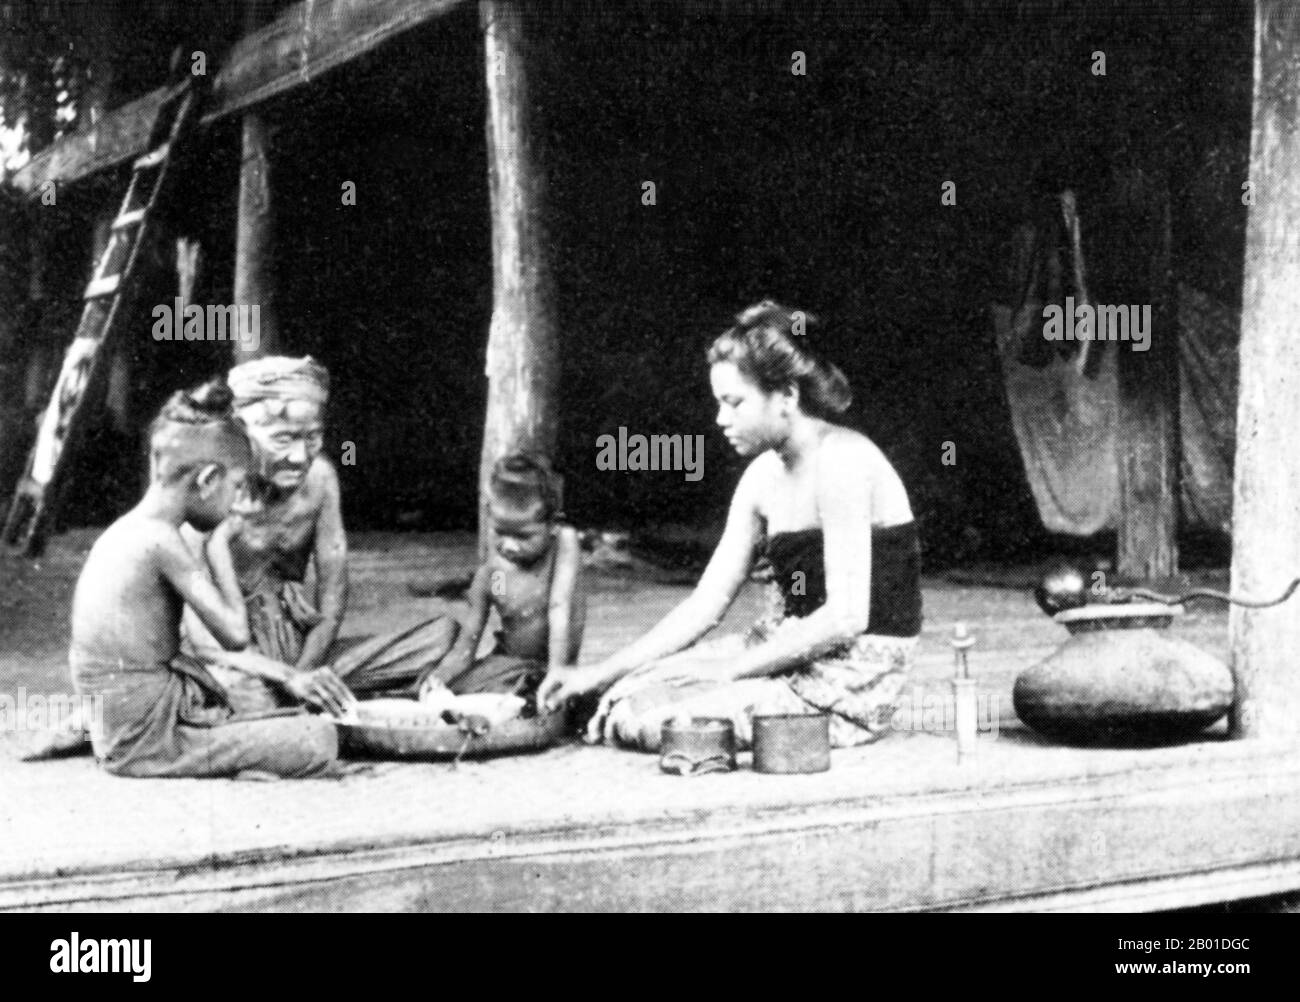 Burma: A Burmese family eat dinner, c. 1892-1896.  The British conquest of Burma began in 1824 in response to a Burmese attempt to invade India. By 1886, and after two further wars, Britain had incorporated the entire country into the British Raj. To stimulate trade and facilitate changes, the British brought in Indians and Chinese, who quickly displaced the Burmese in urban areas. To this day Rangoon and Mandalay have large ethnic Indian populations. Railways and schools were built, as well as a large number of prisons, including the infamous Insein Prison. Stock Photo